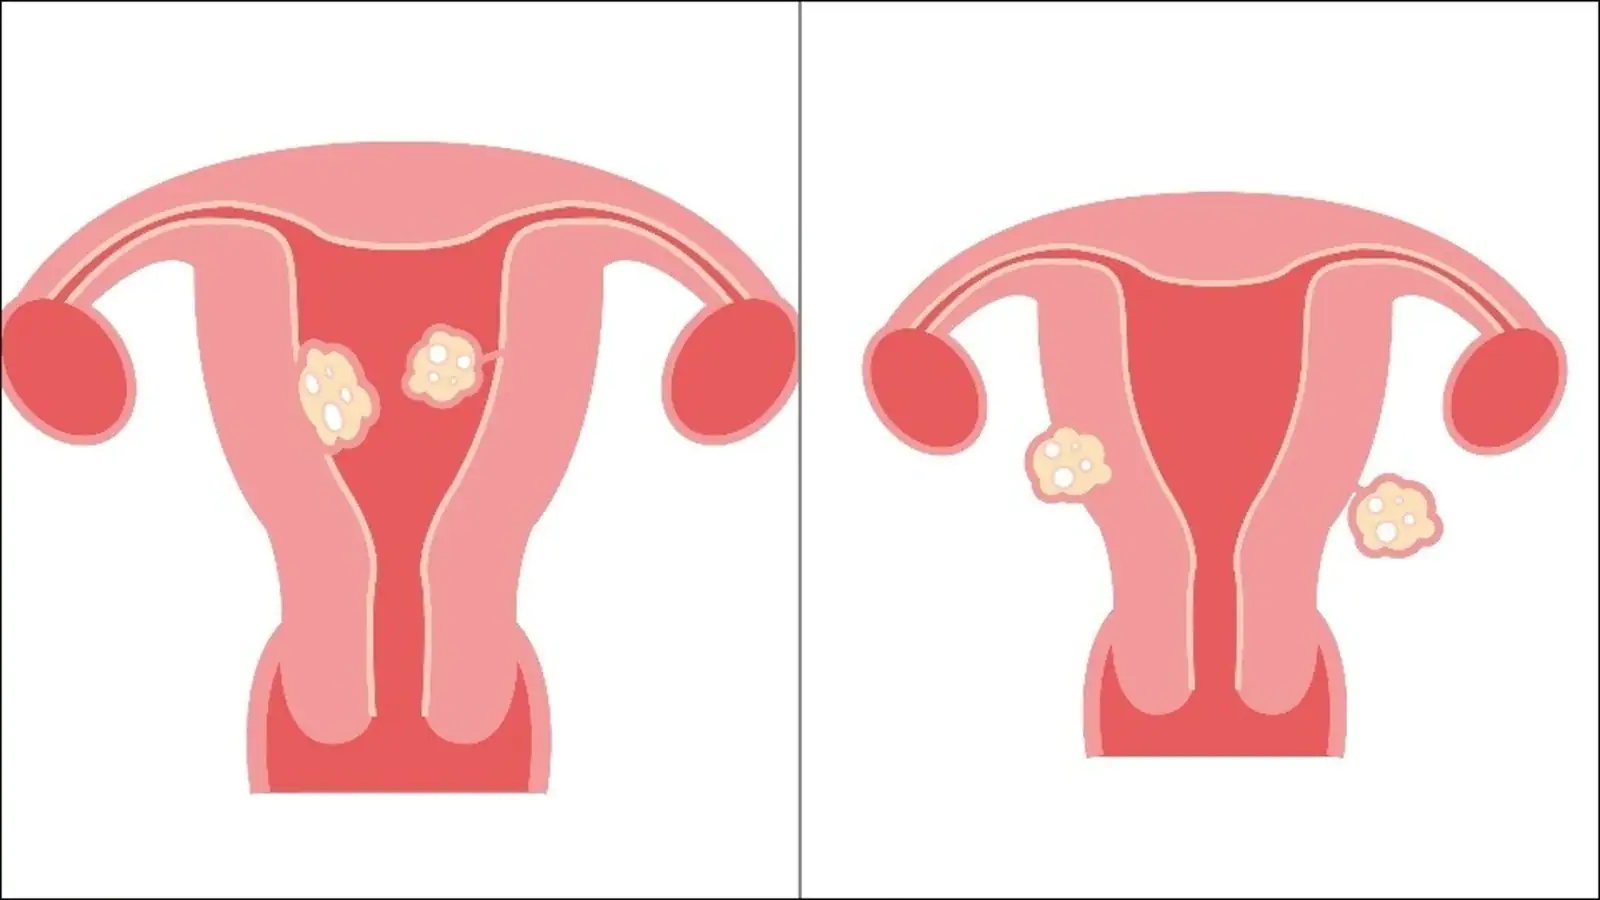 Battling Fibroids: 7 Things That Can Help Manage the Symptoms